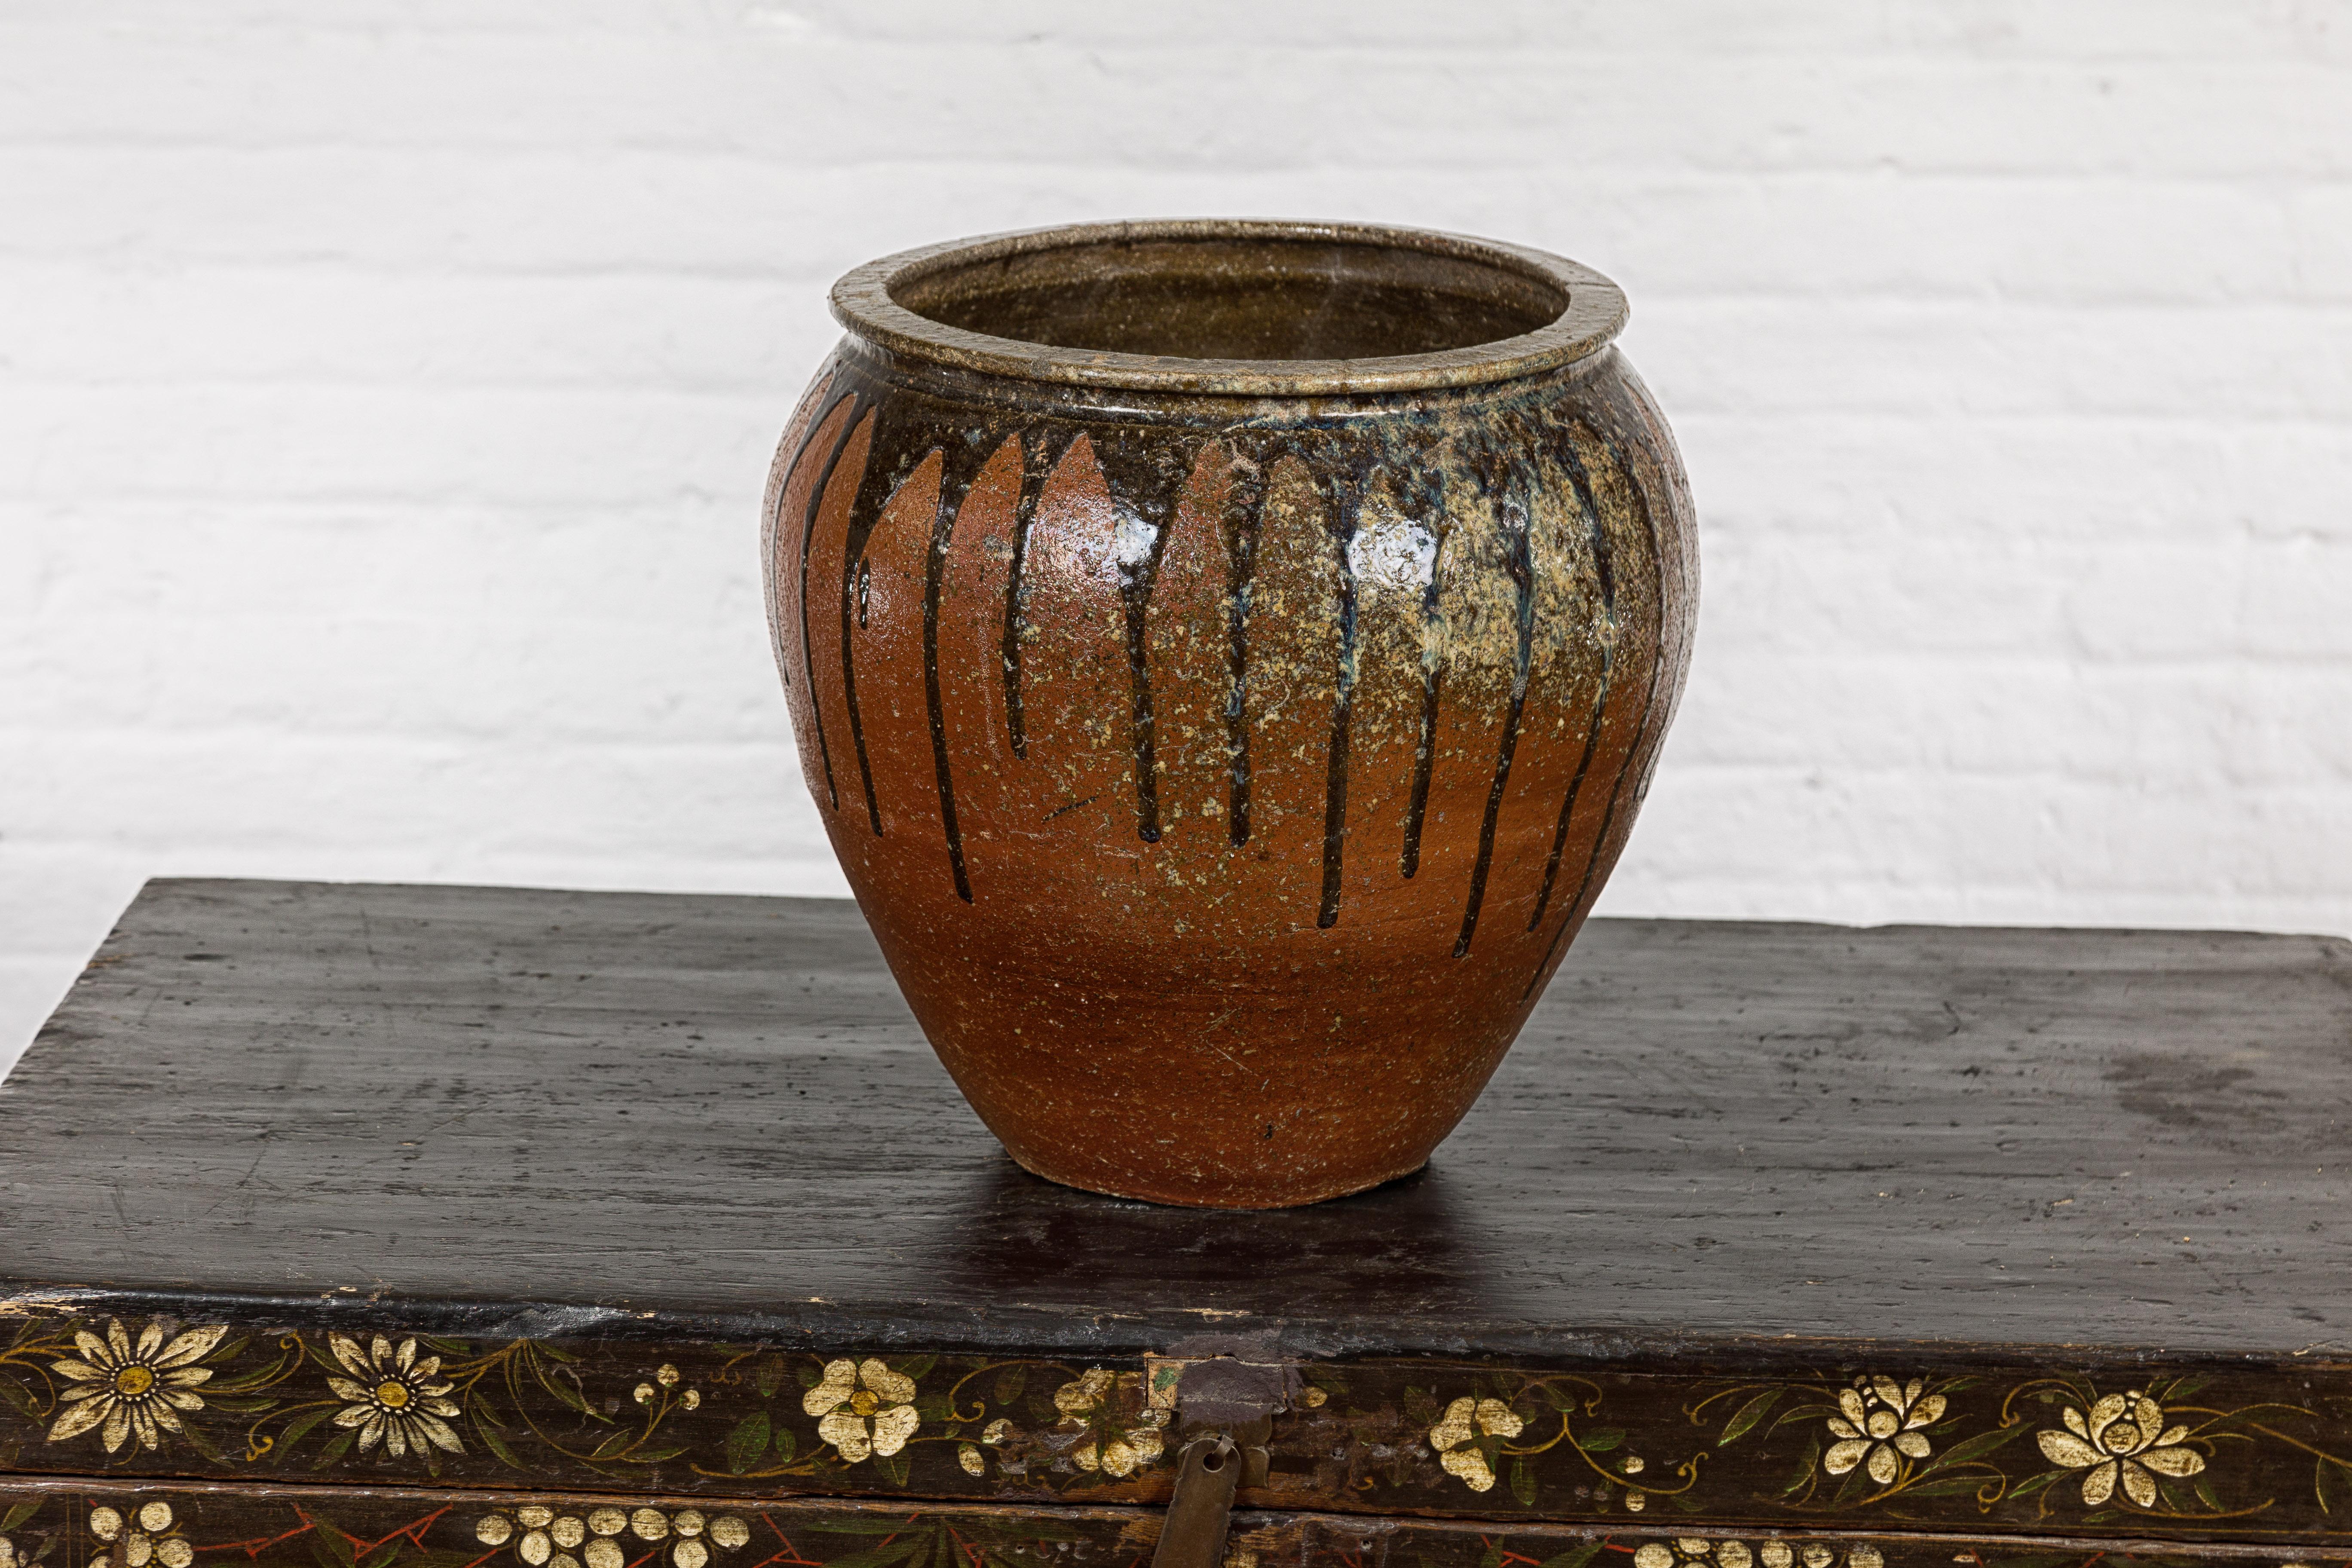 Japanese Tamba Ware Brown Glazed Ceramic Salt Pot Planter with Dripping For Sale 6